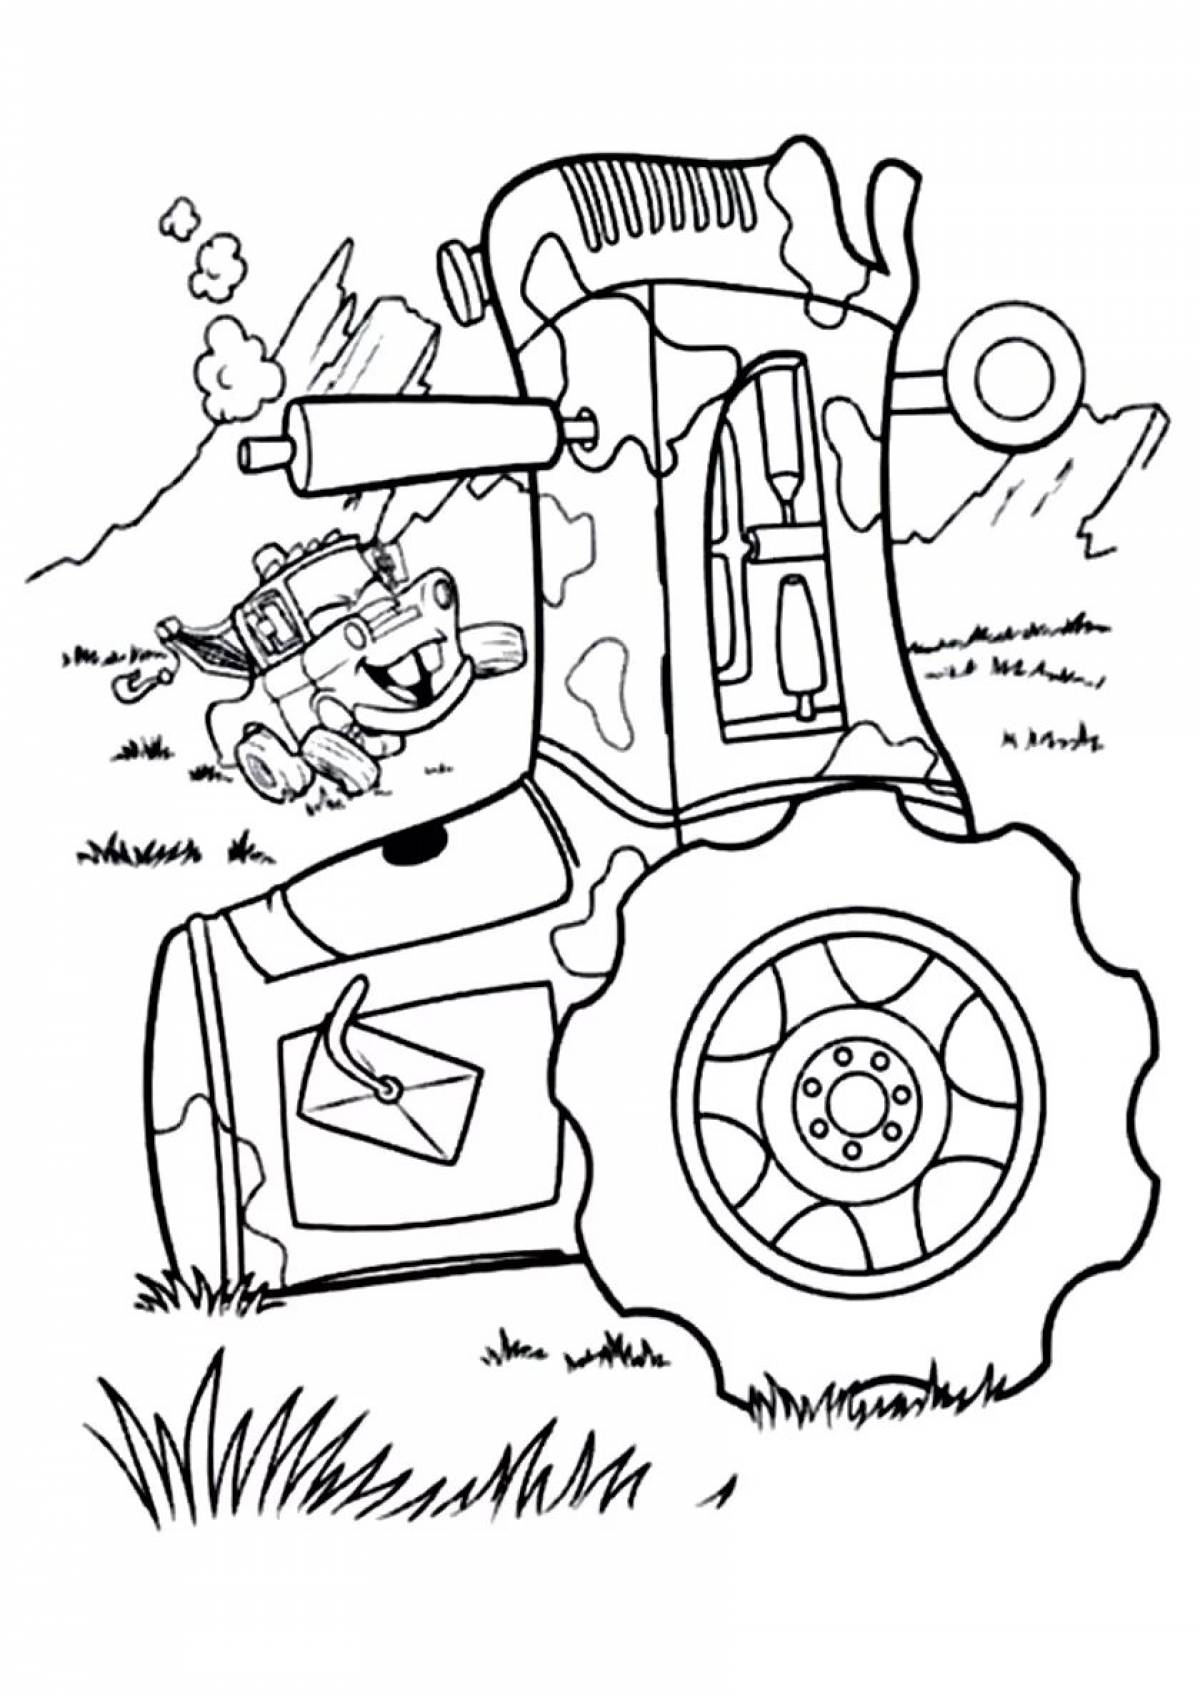 Frank's gorgeous cars coloring book